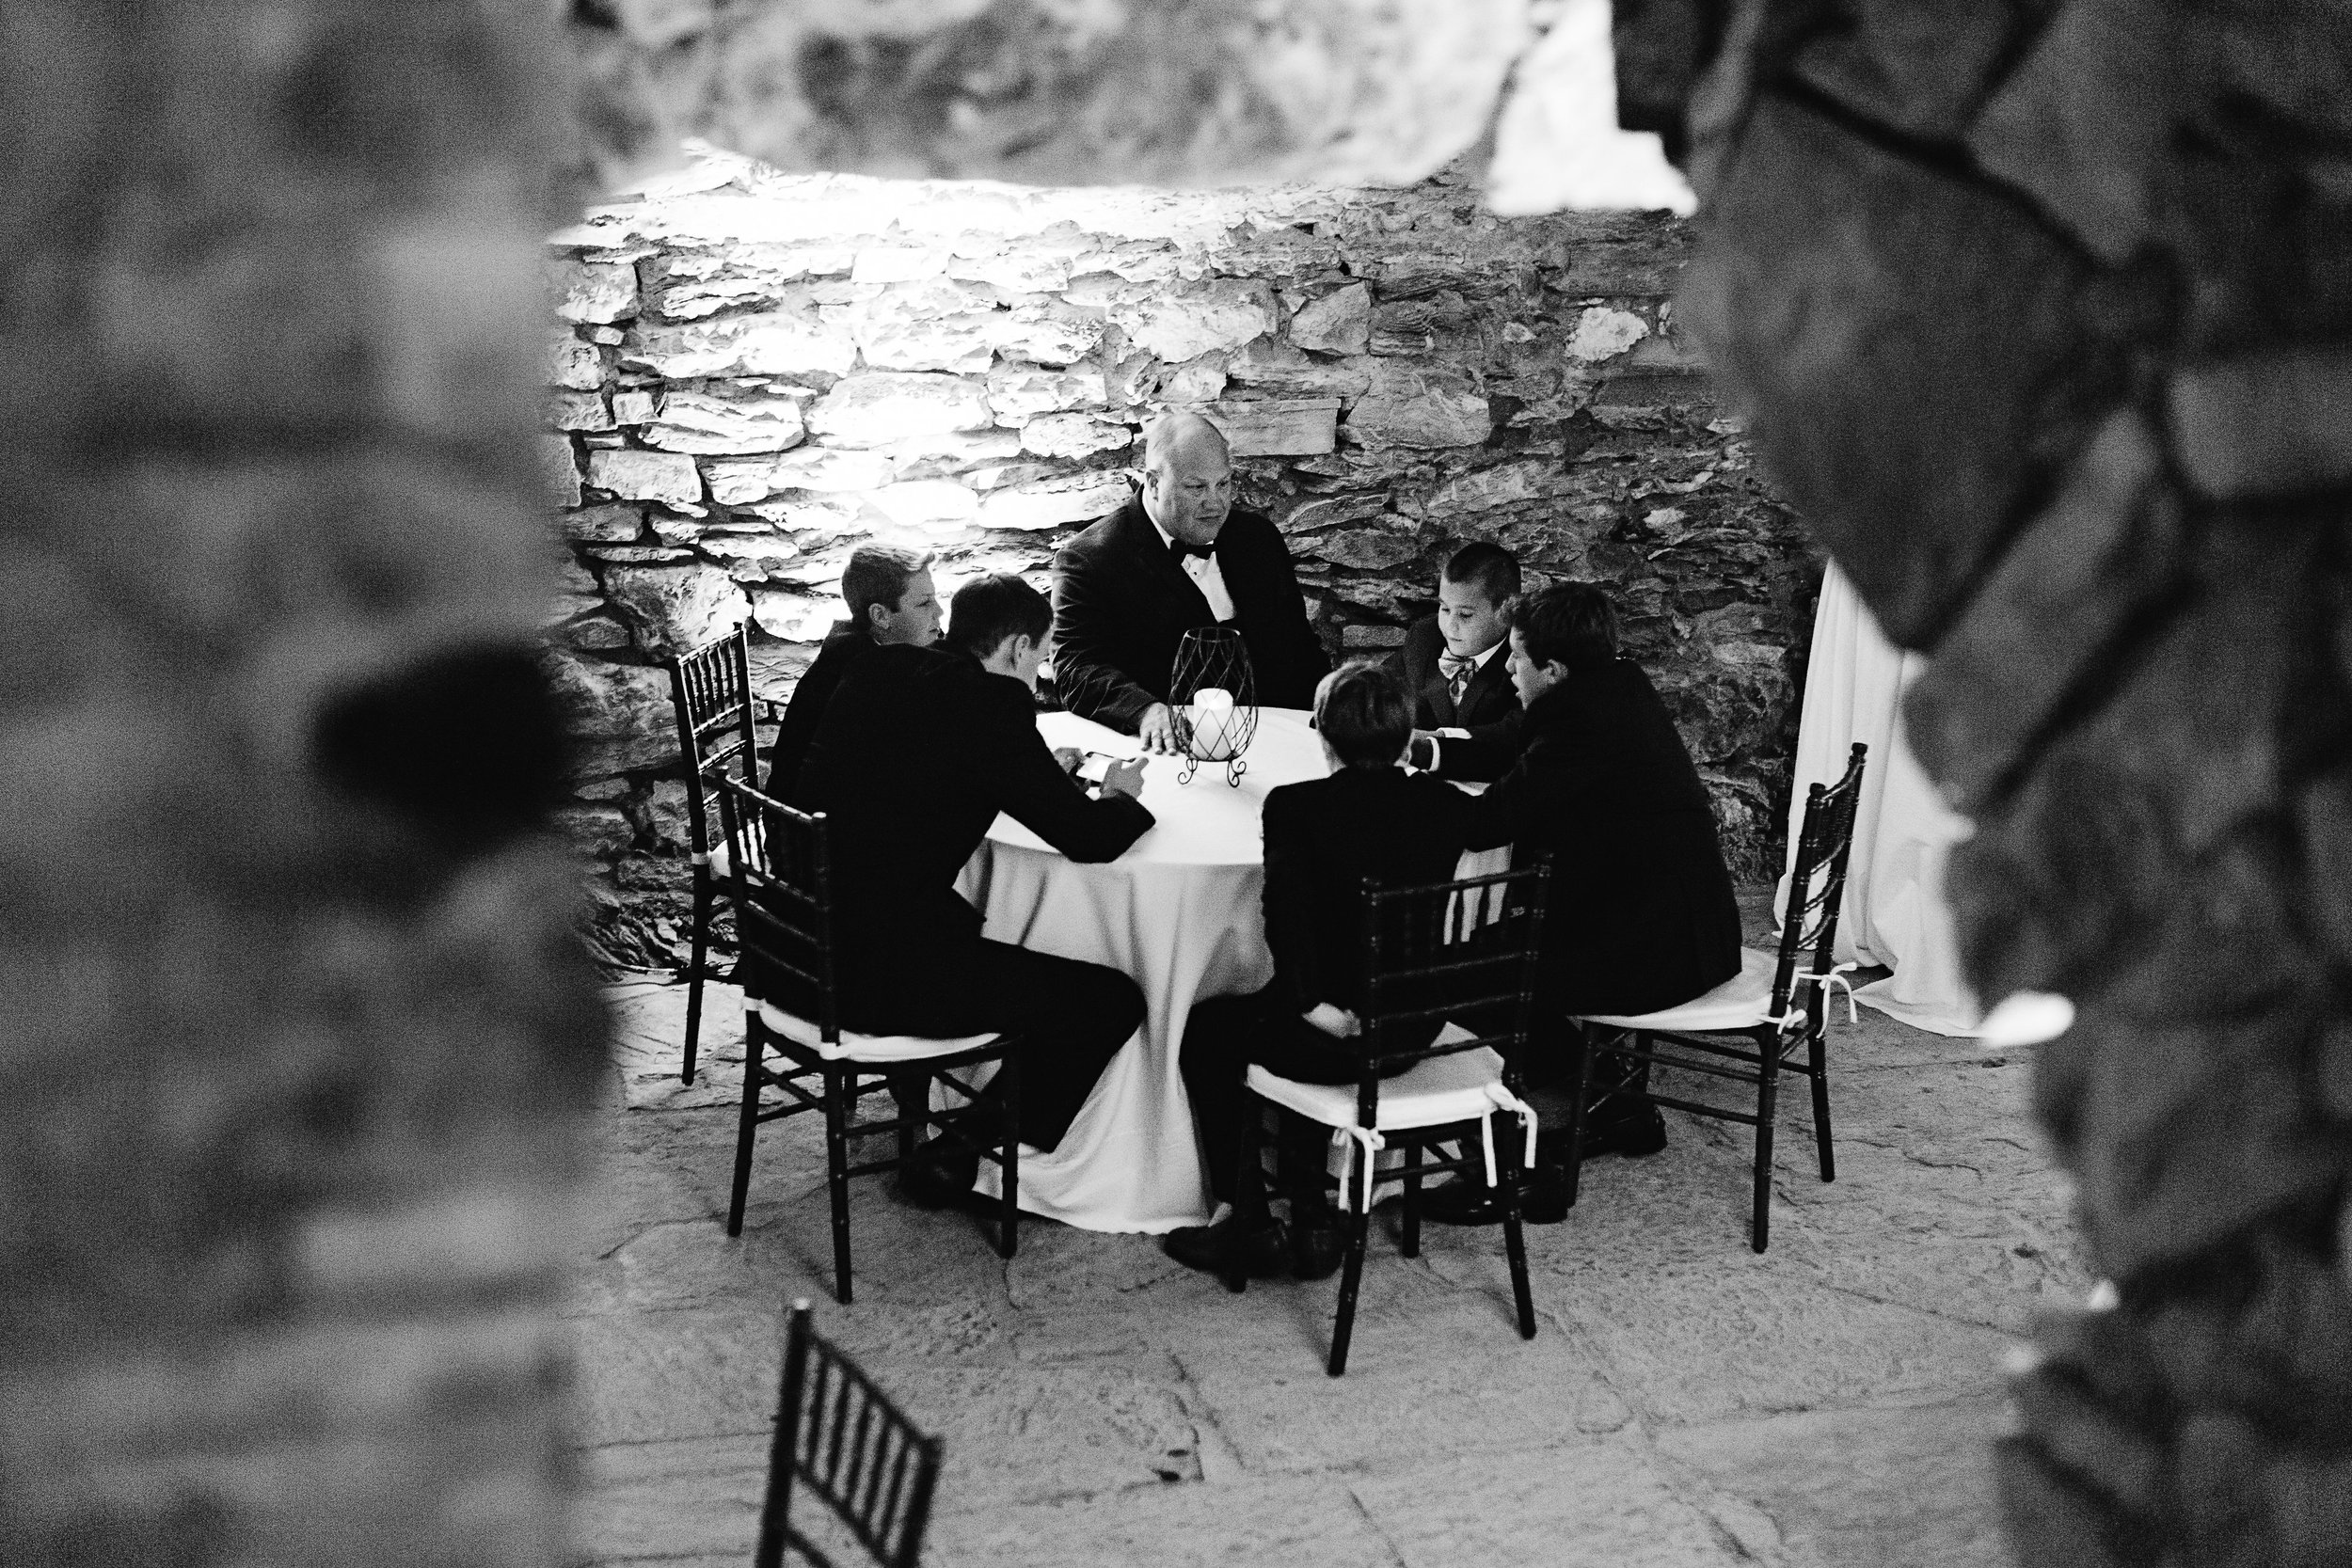 Men sitting around table in catacombs black and white